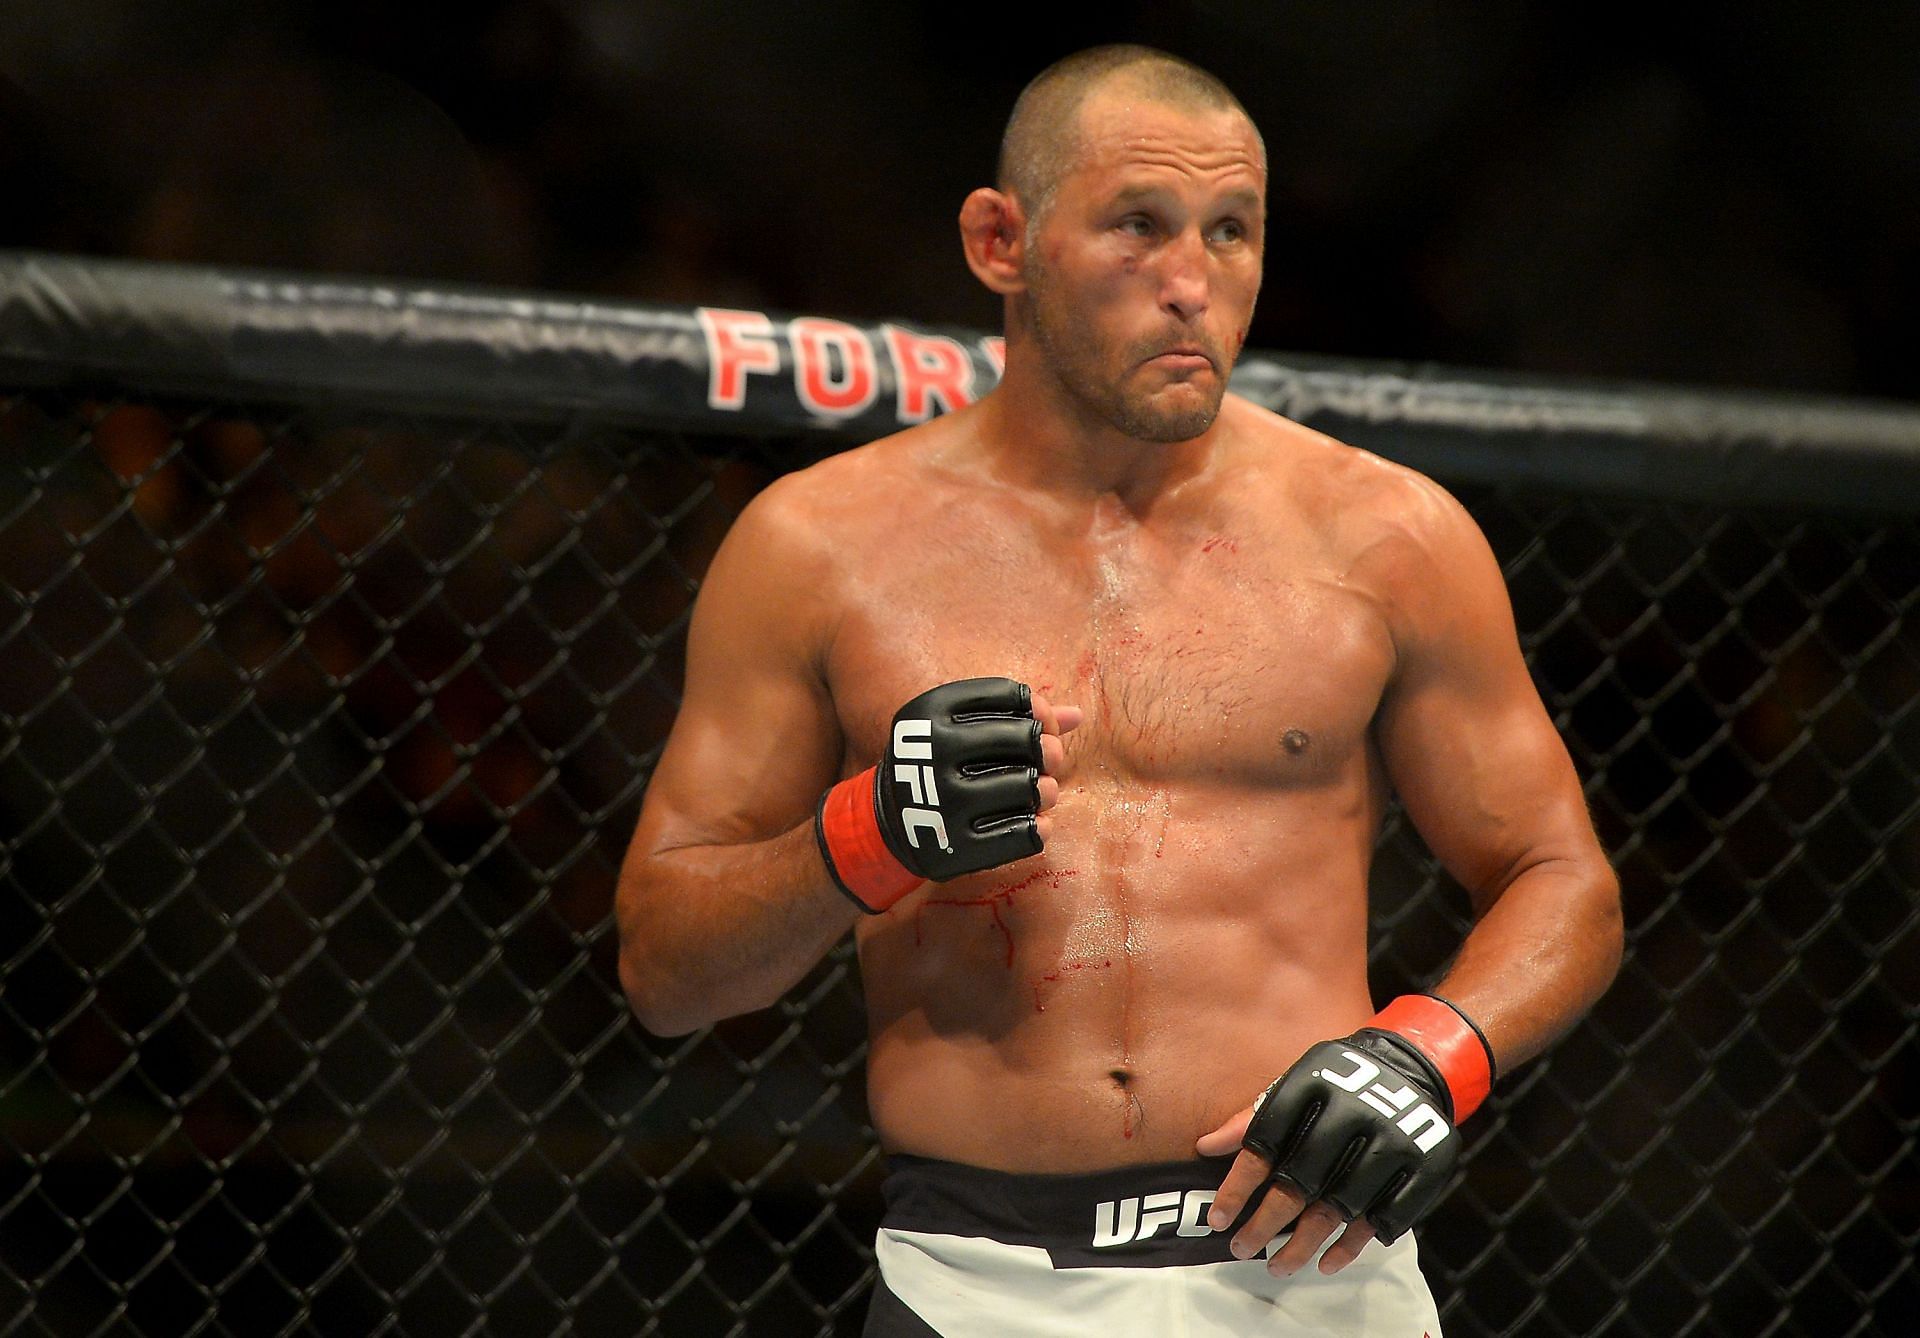 Dan Henderson fought Quinton Jackson in the biggest fight to ever hit the UK